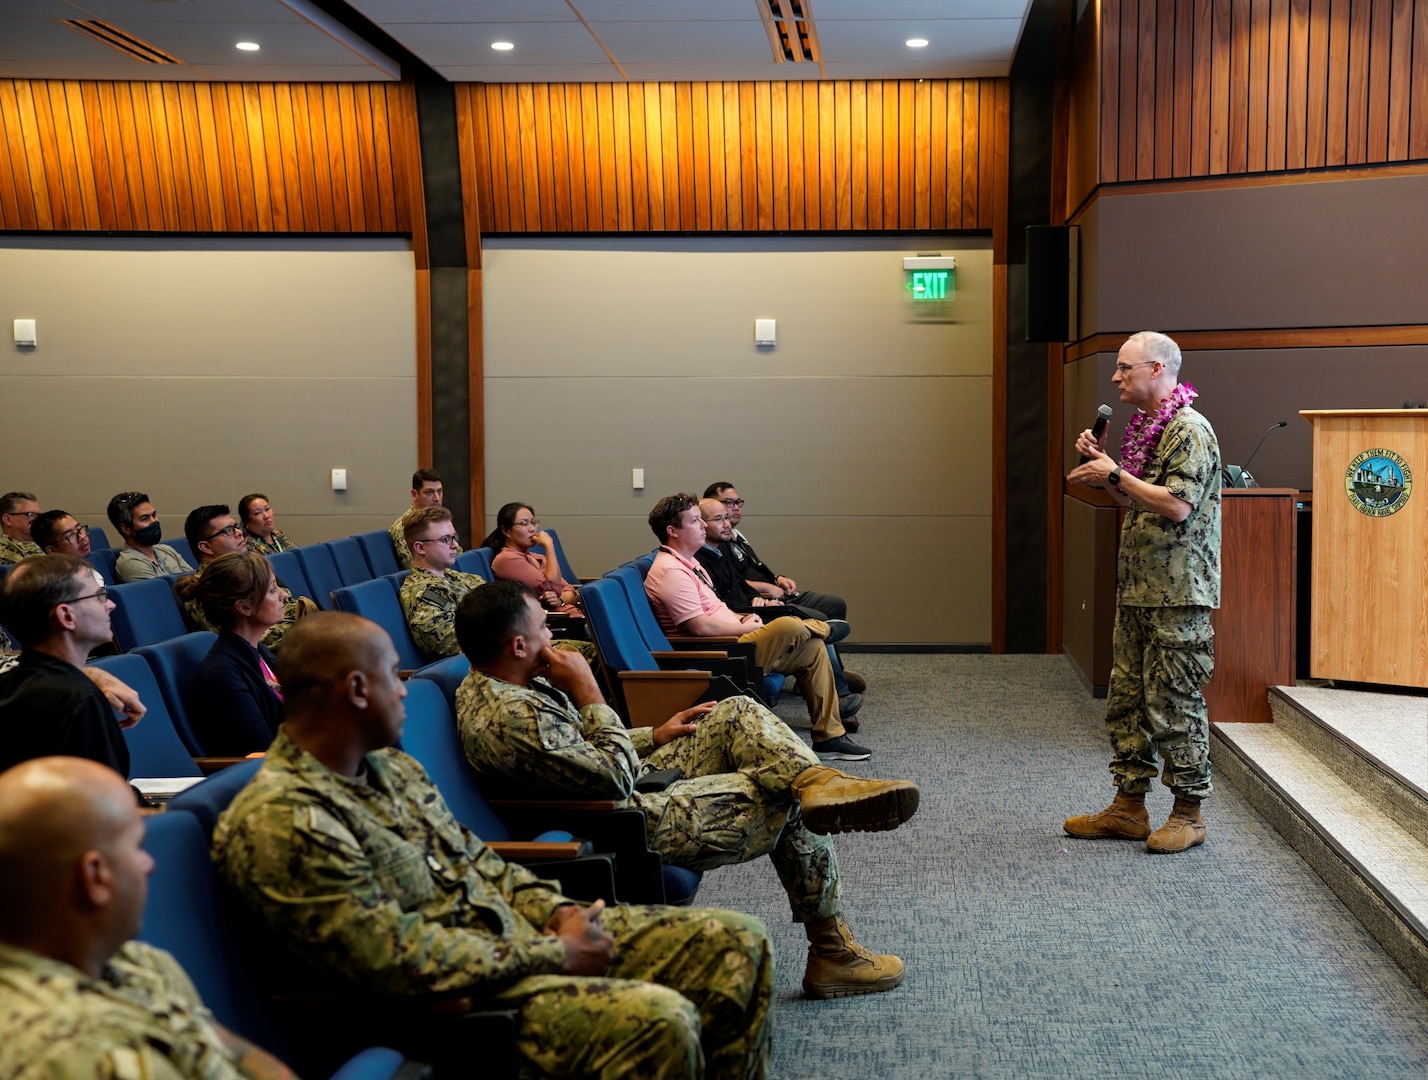 Rear Adm. William Greene, right, stands at the front of an auditorium speaking to a room of Sailors and civilians.